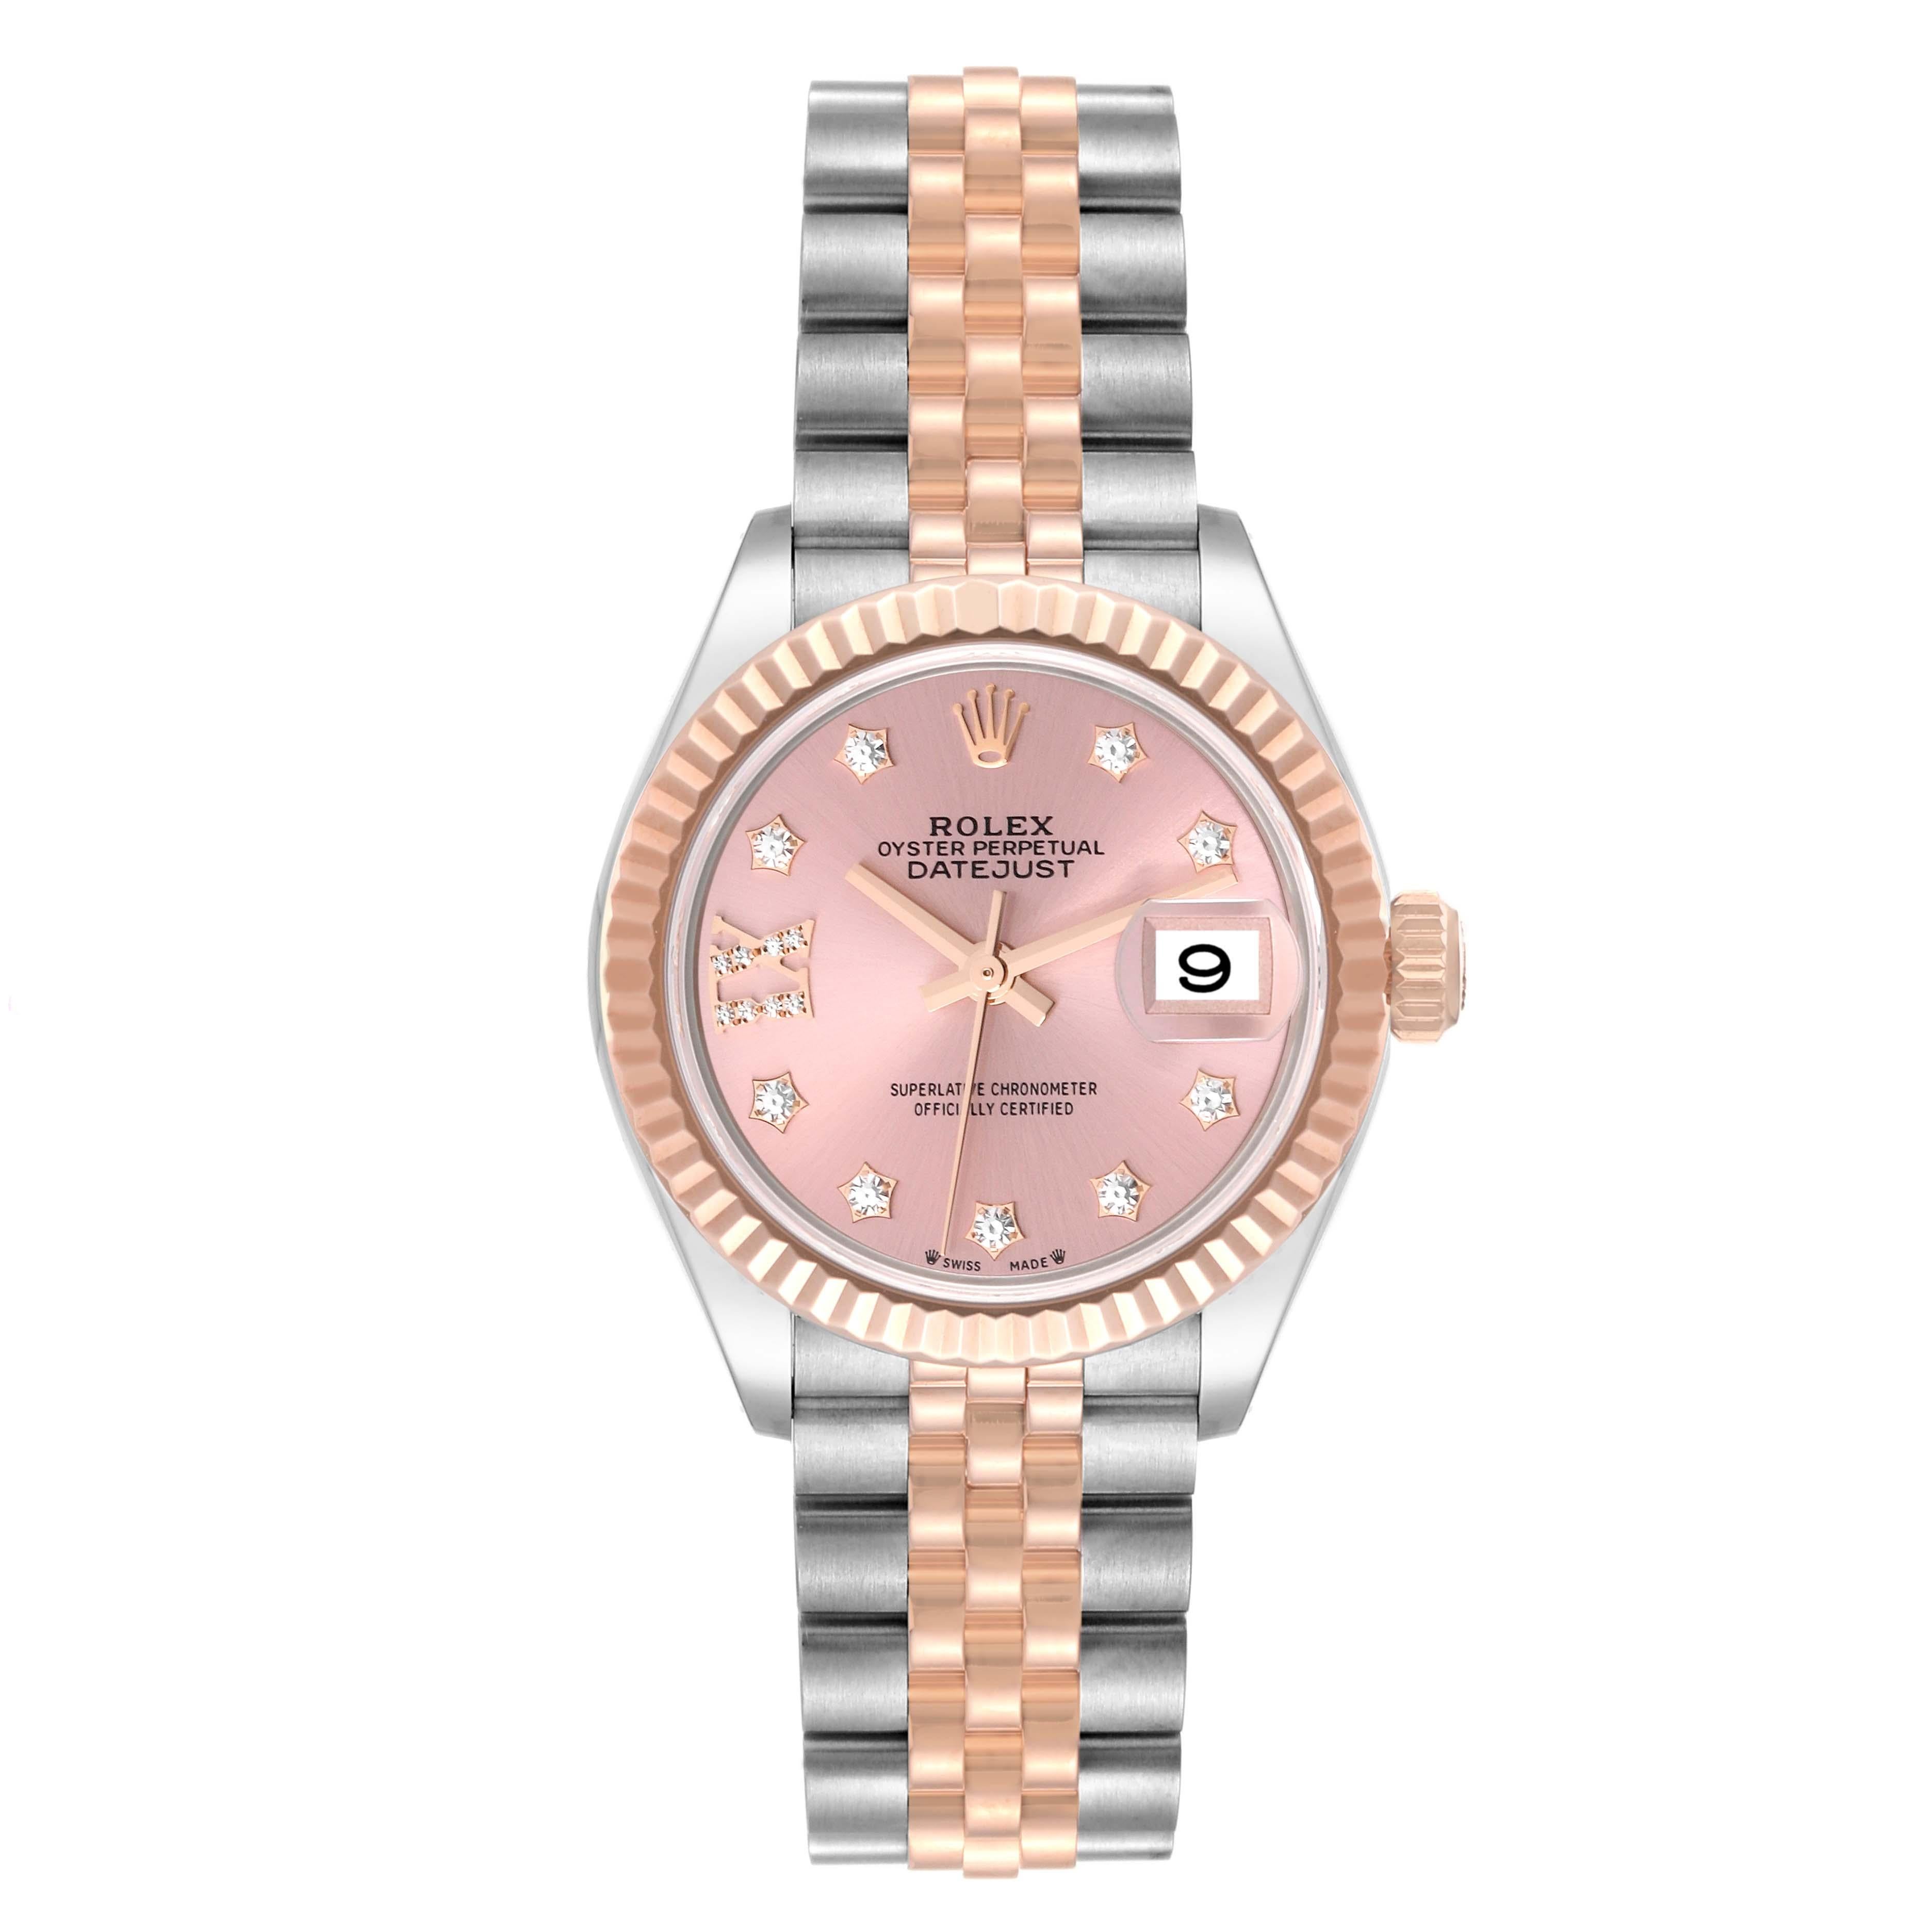 Rolex Datejust Steel Rose Gold Pink Diamond Dial Ladies Watch 279171 Box Card. Officially certified chronometer self-winding movement. Stainless steel oyster case 28 mm in diameter. Rolex logo on a 18K rose gold crown. 18k everose gold fluted bezel.